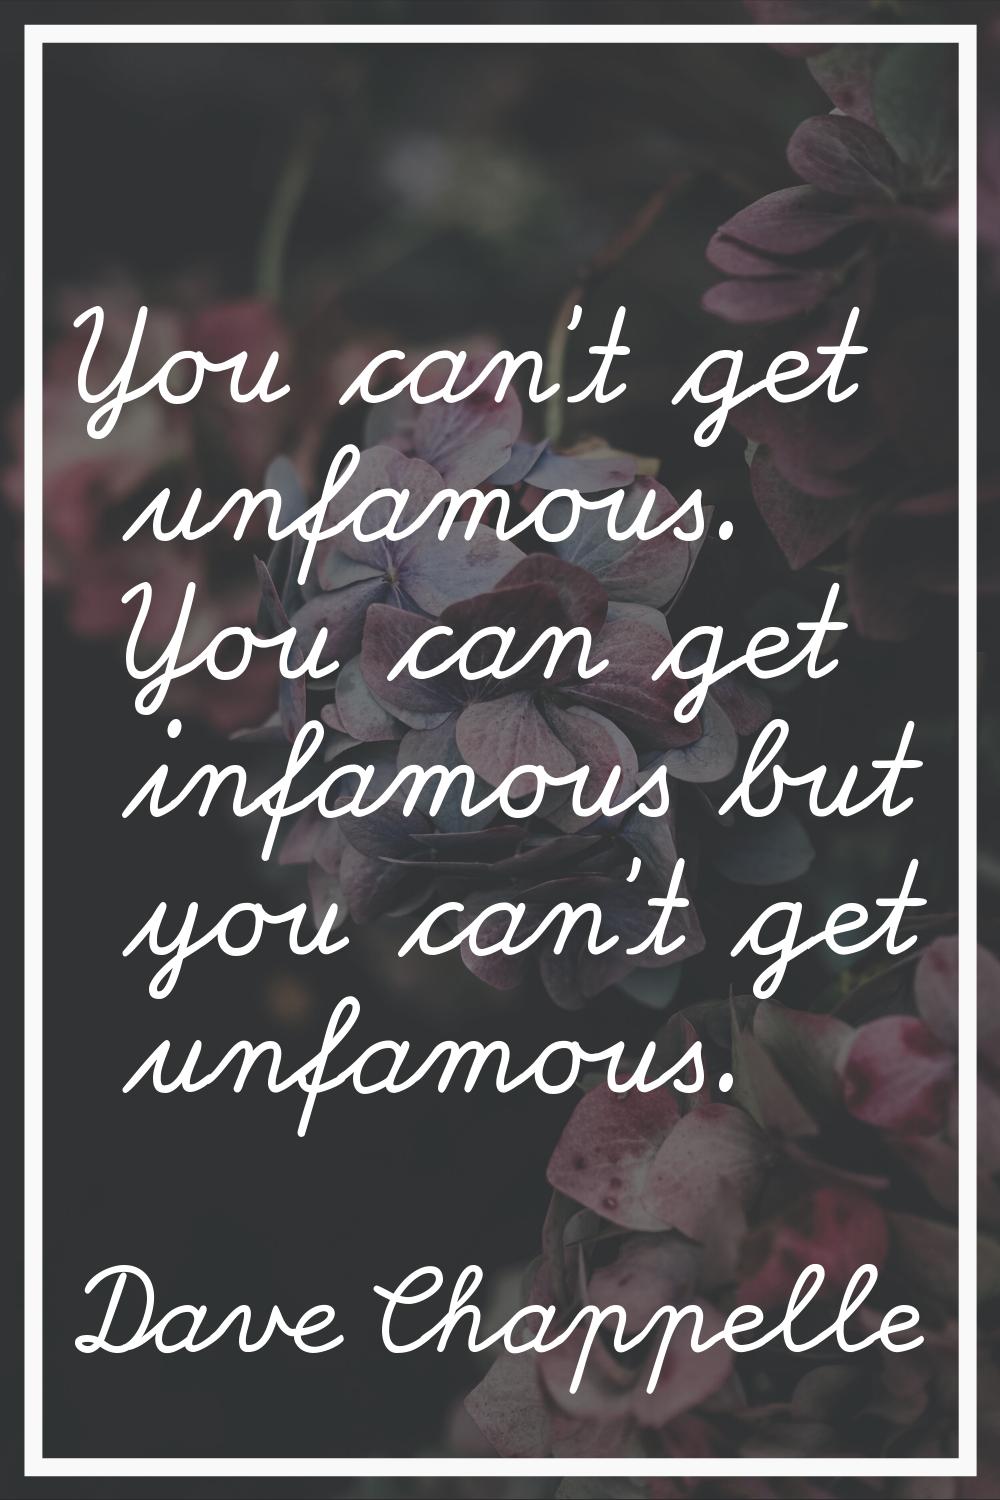 You can't get unfamous. You can get infamous but you can't get unfamous.